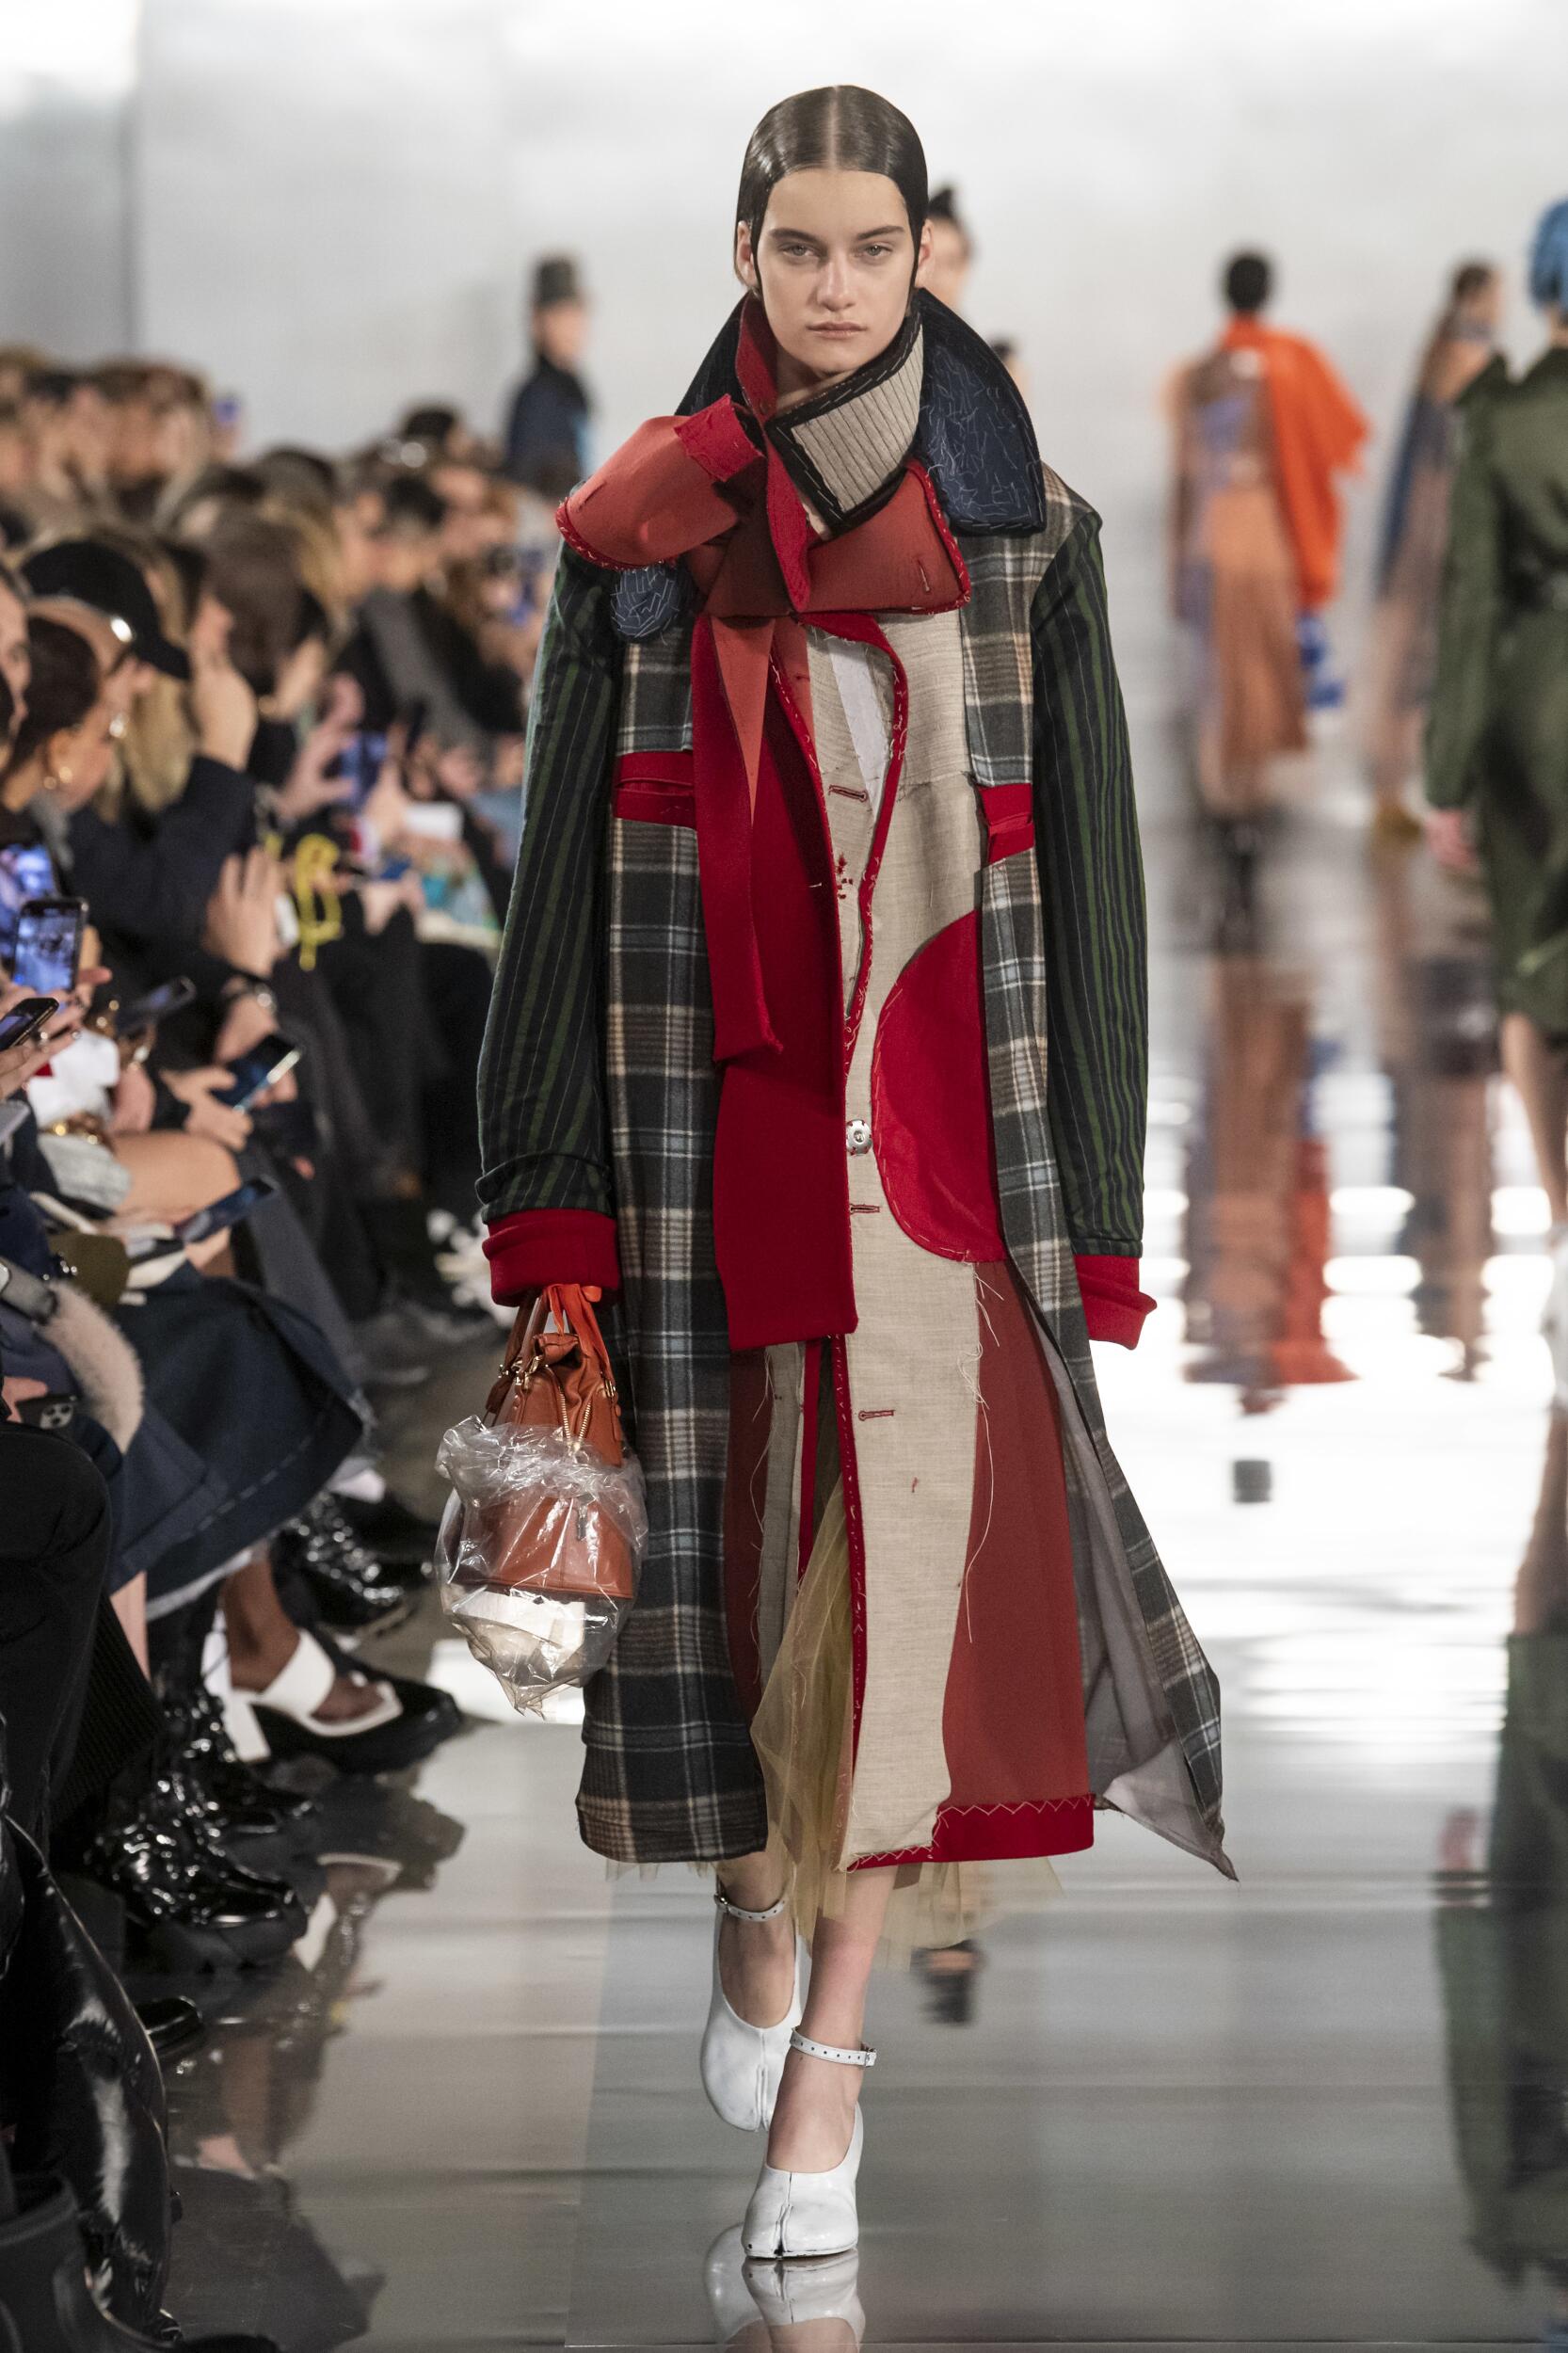 MAISON MARGIELA FALL WINTER 2020 COLLECTION | The Skinny Beep